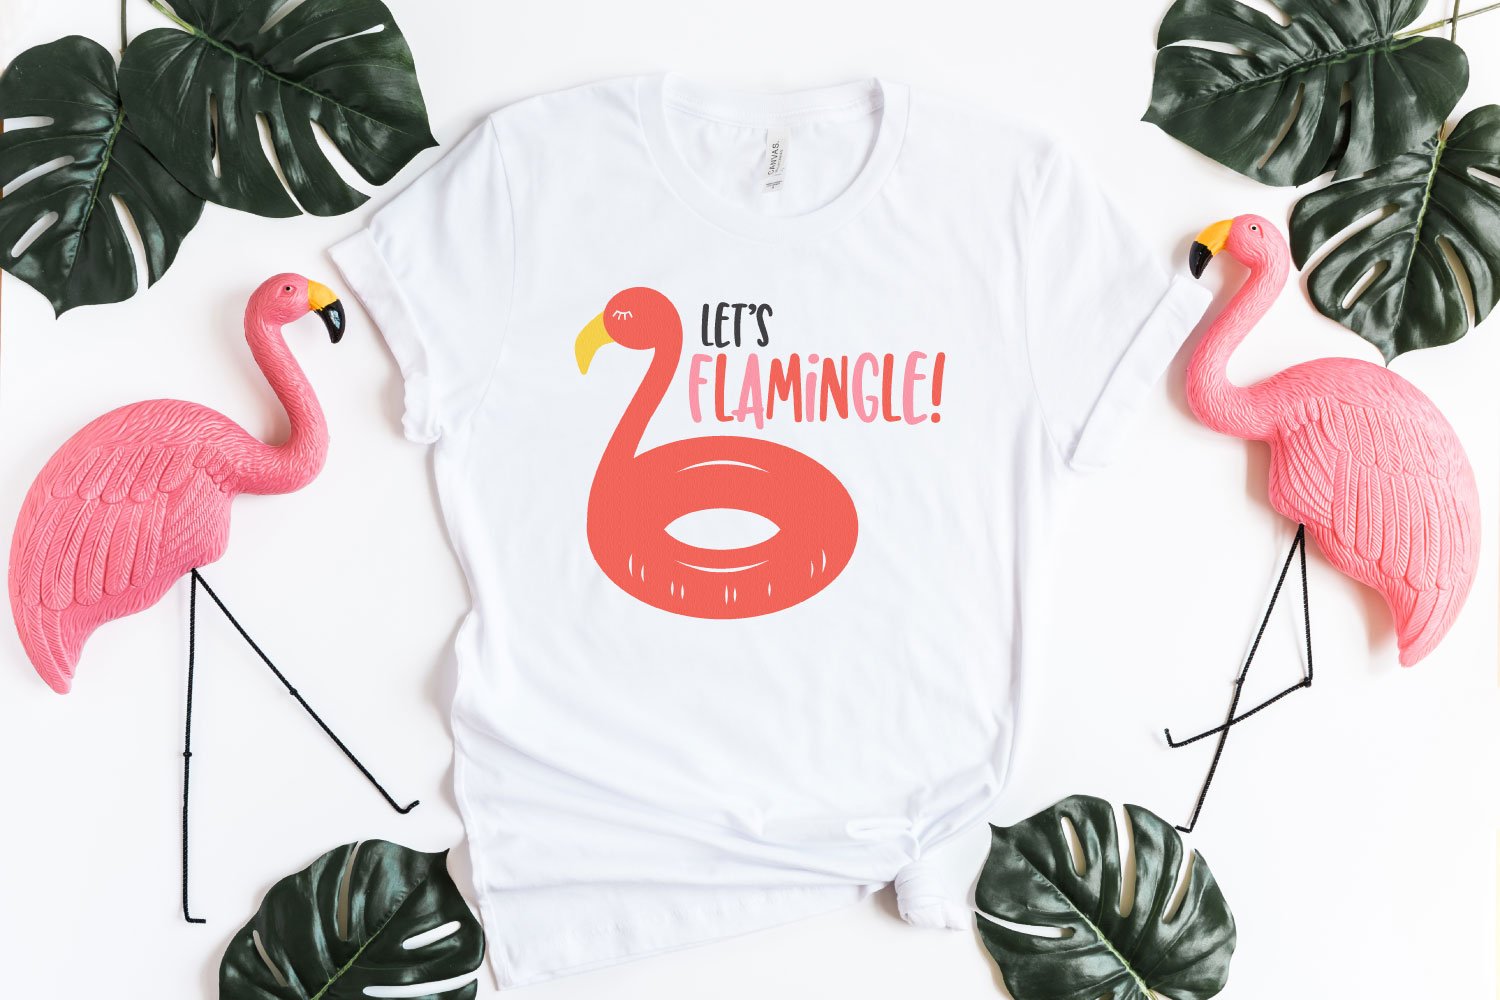 Let's Flamingle SVG on white shirt with plastic flamingoes